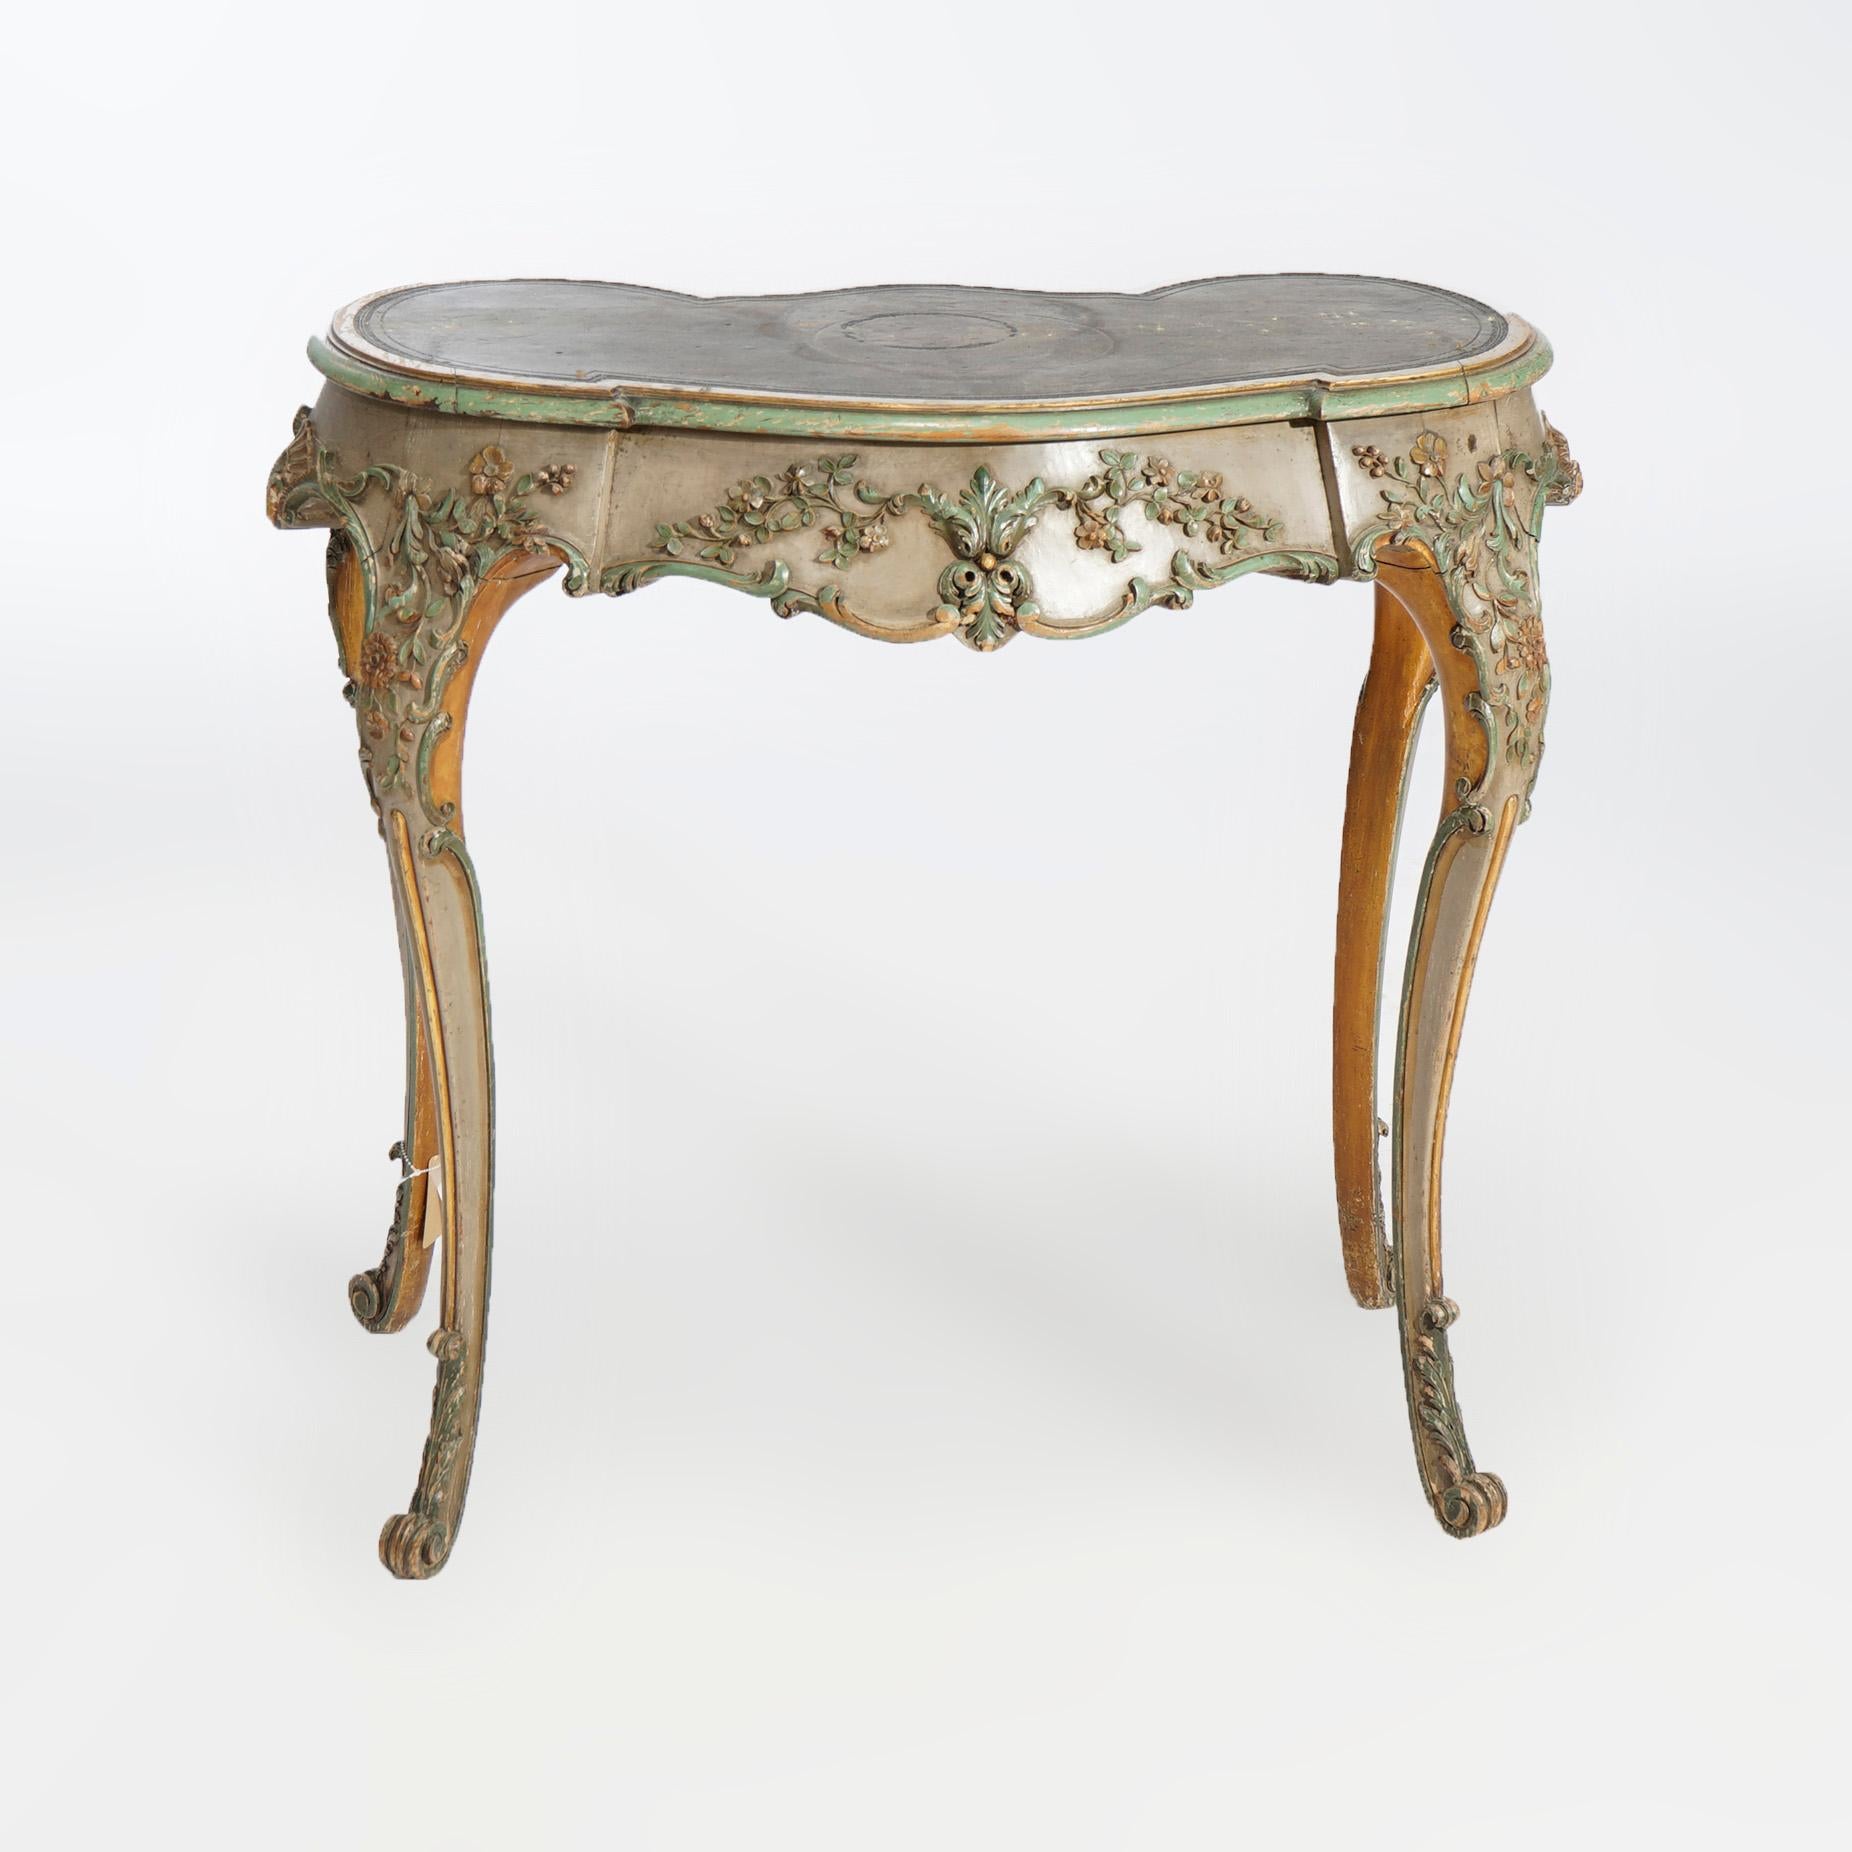 An antique French Louis XVI ladies boudoir writing desk offers serpentine form with polychromed floral and foliate elements throughout, case with single drawer, raised on cabriole legs with scroll from feet, 18th century

Measures- 31'' H x